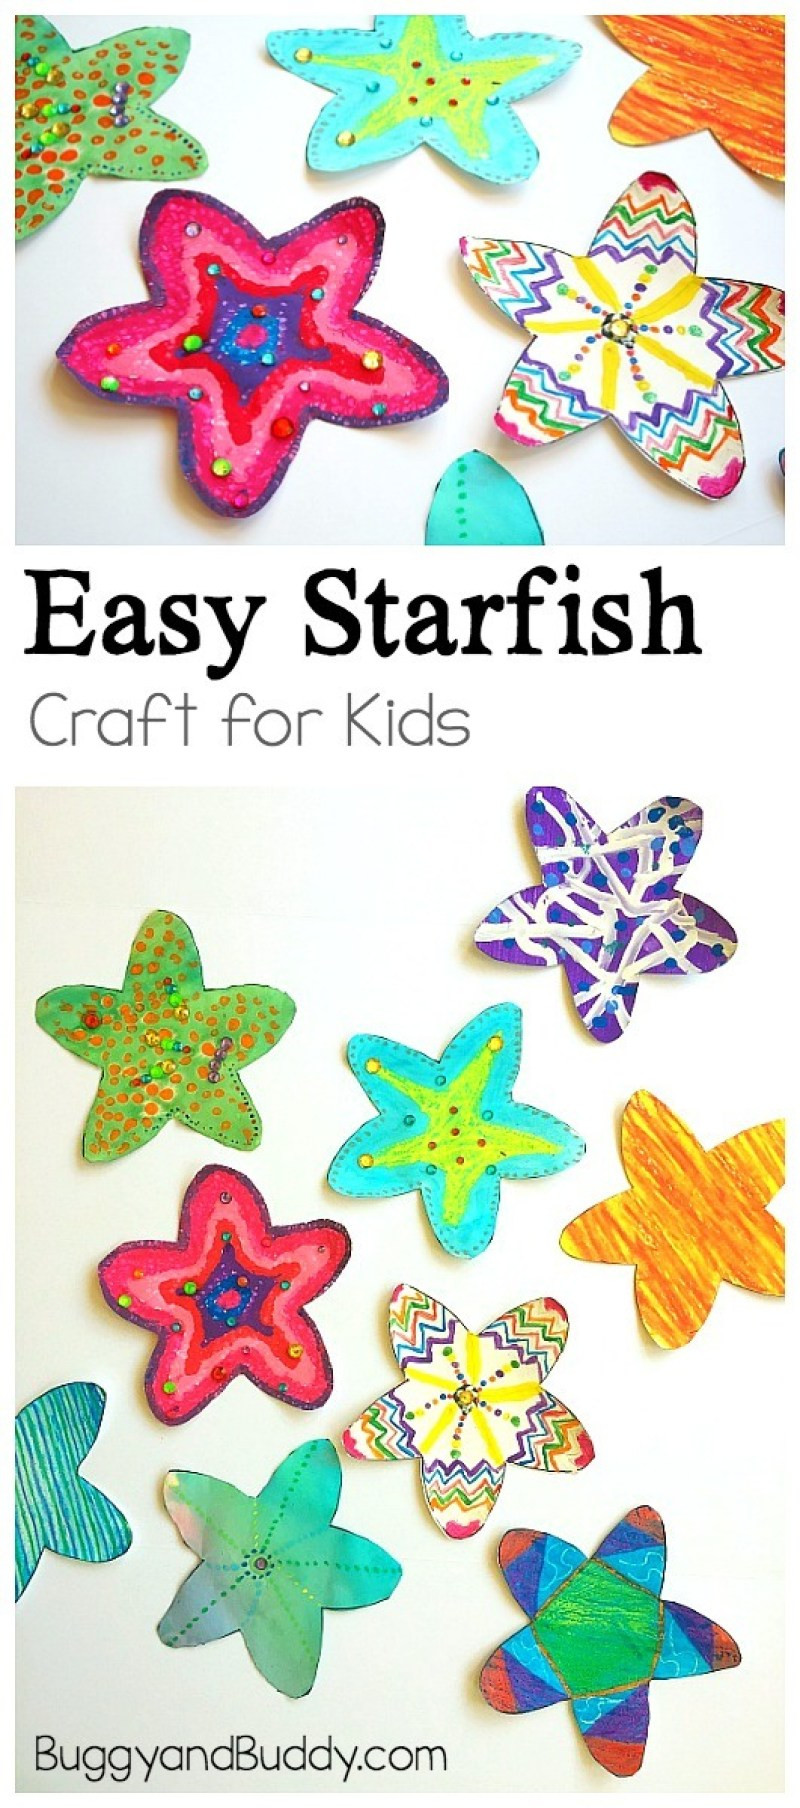 Fun Summer Crafts For Kids
 12 Favorite Easy Summer Crafts for Kids on Love the Day